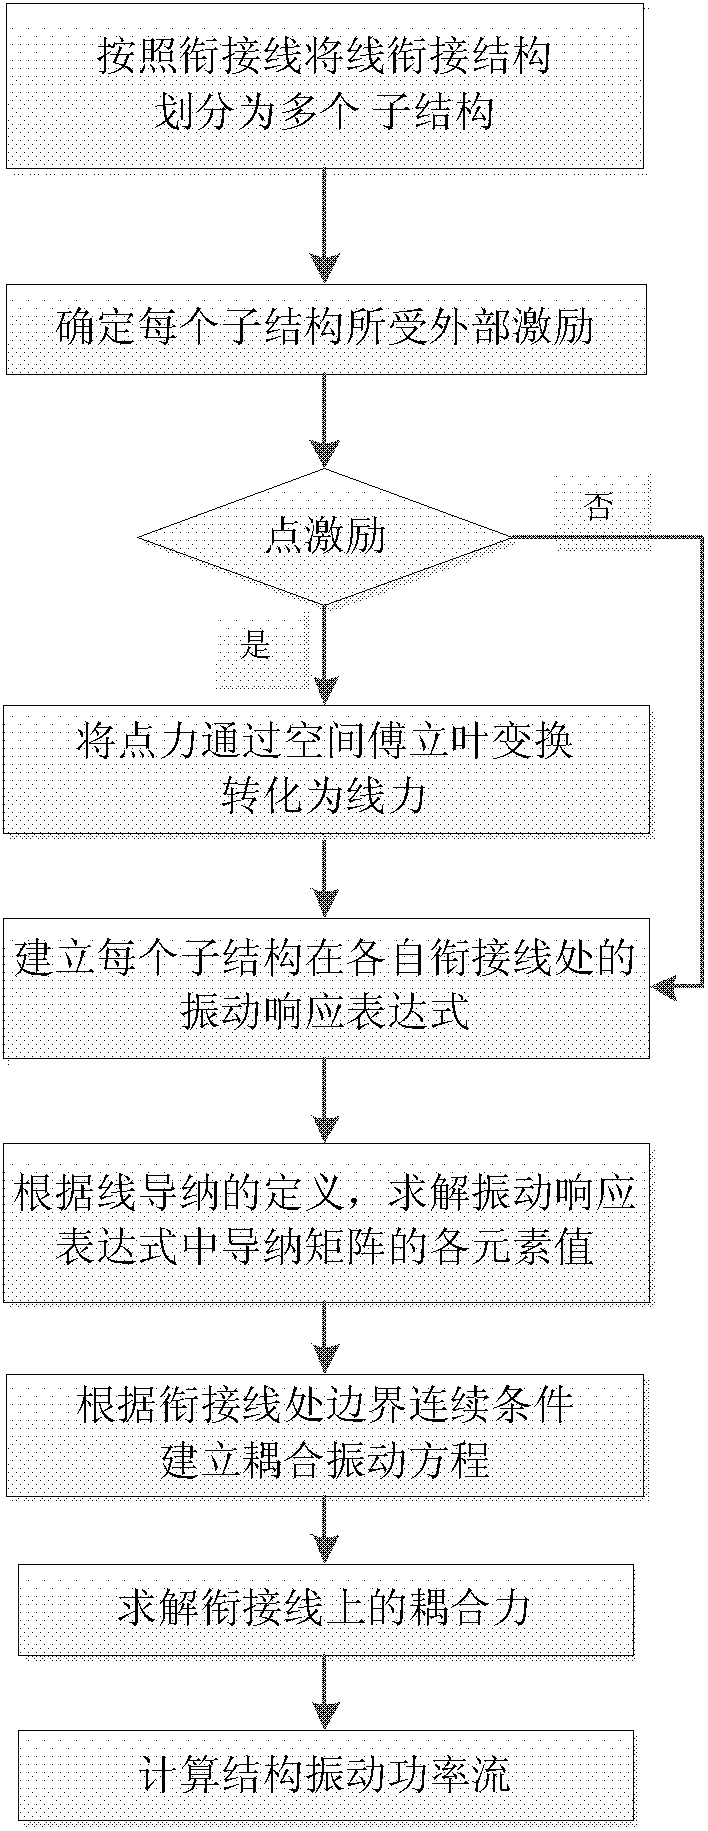 Method for determining vibration response of line-connected structure with parallel connecting lines